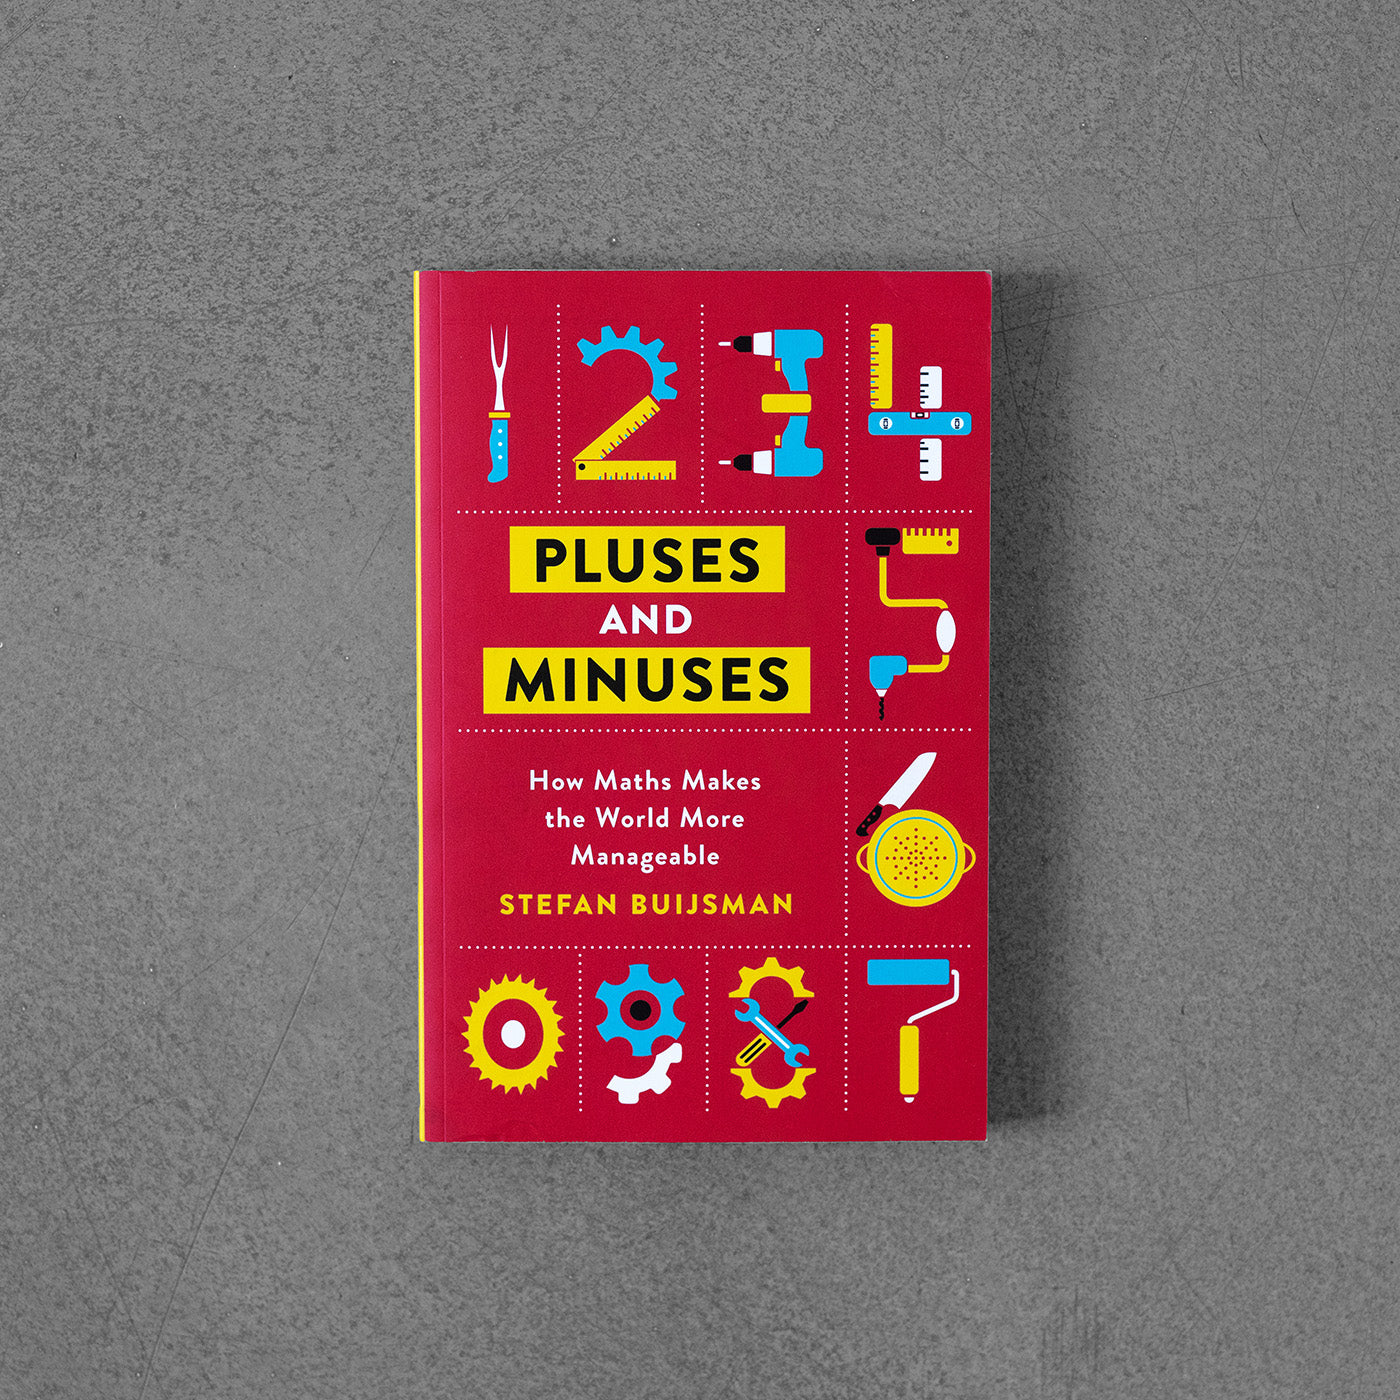 Pluses and Minuses, How Maths Makes the World More Manageable